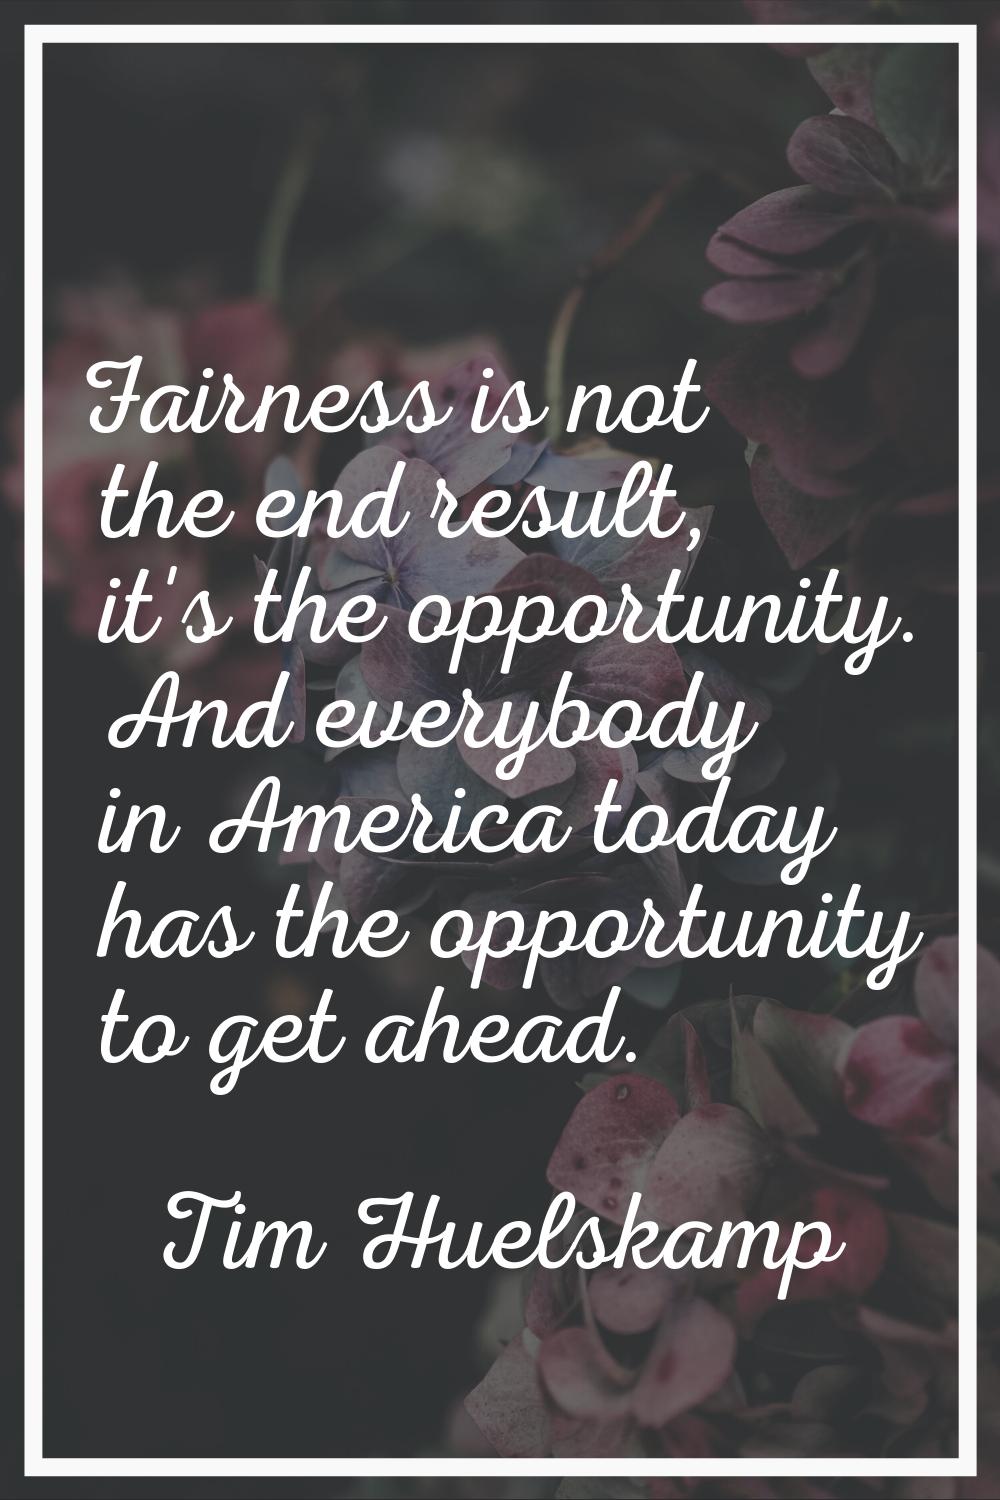 Fairness is not the end result, it's the opportunity. And everybody in America today has the opport